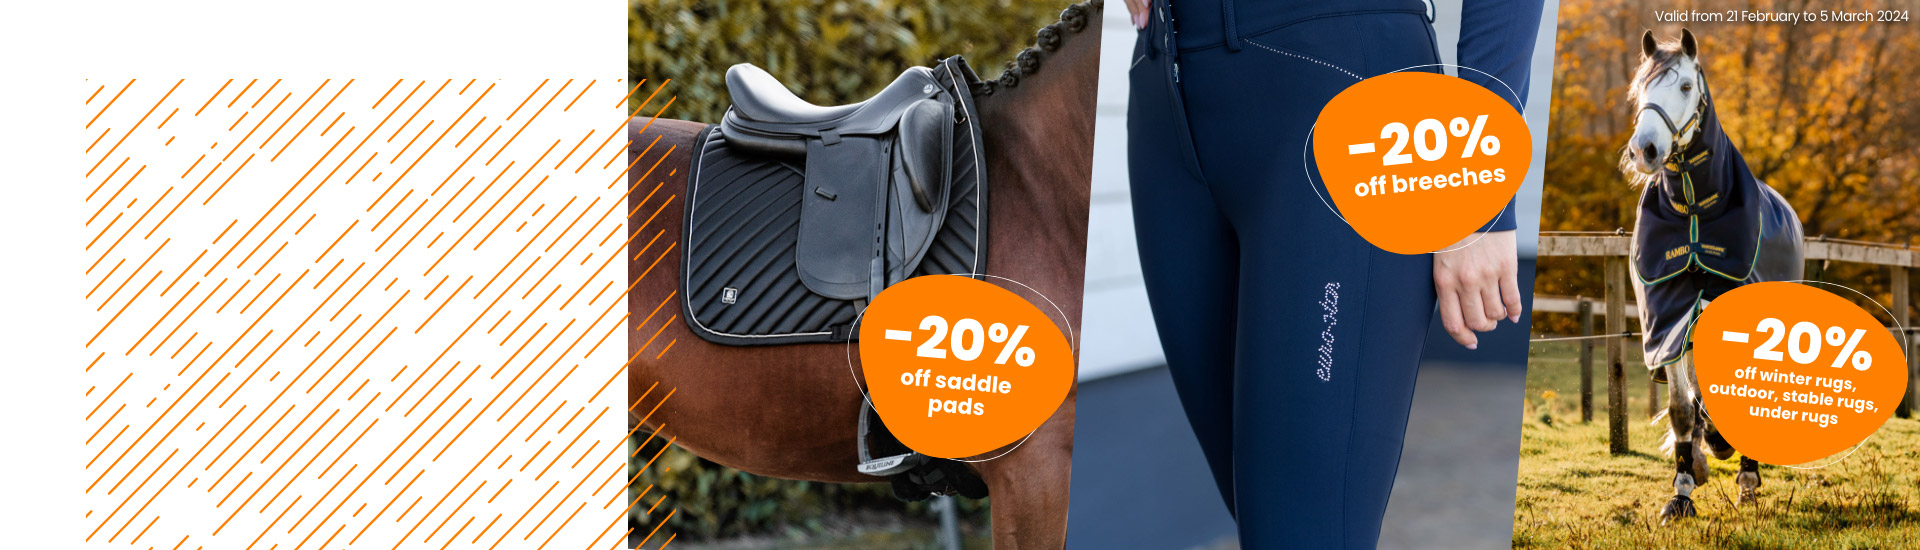 -20% breeches, rugs, saddle pads